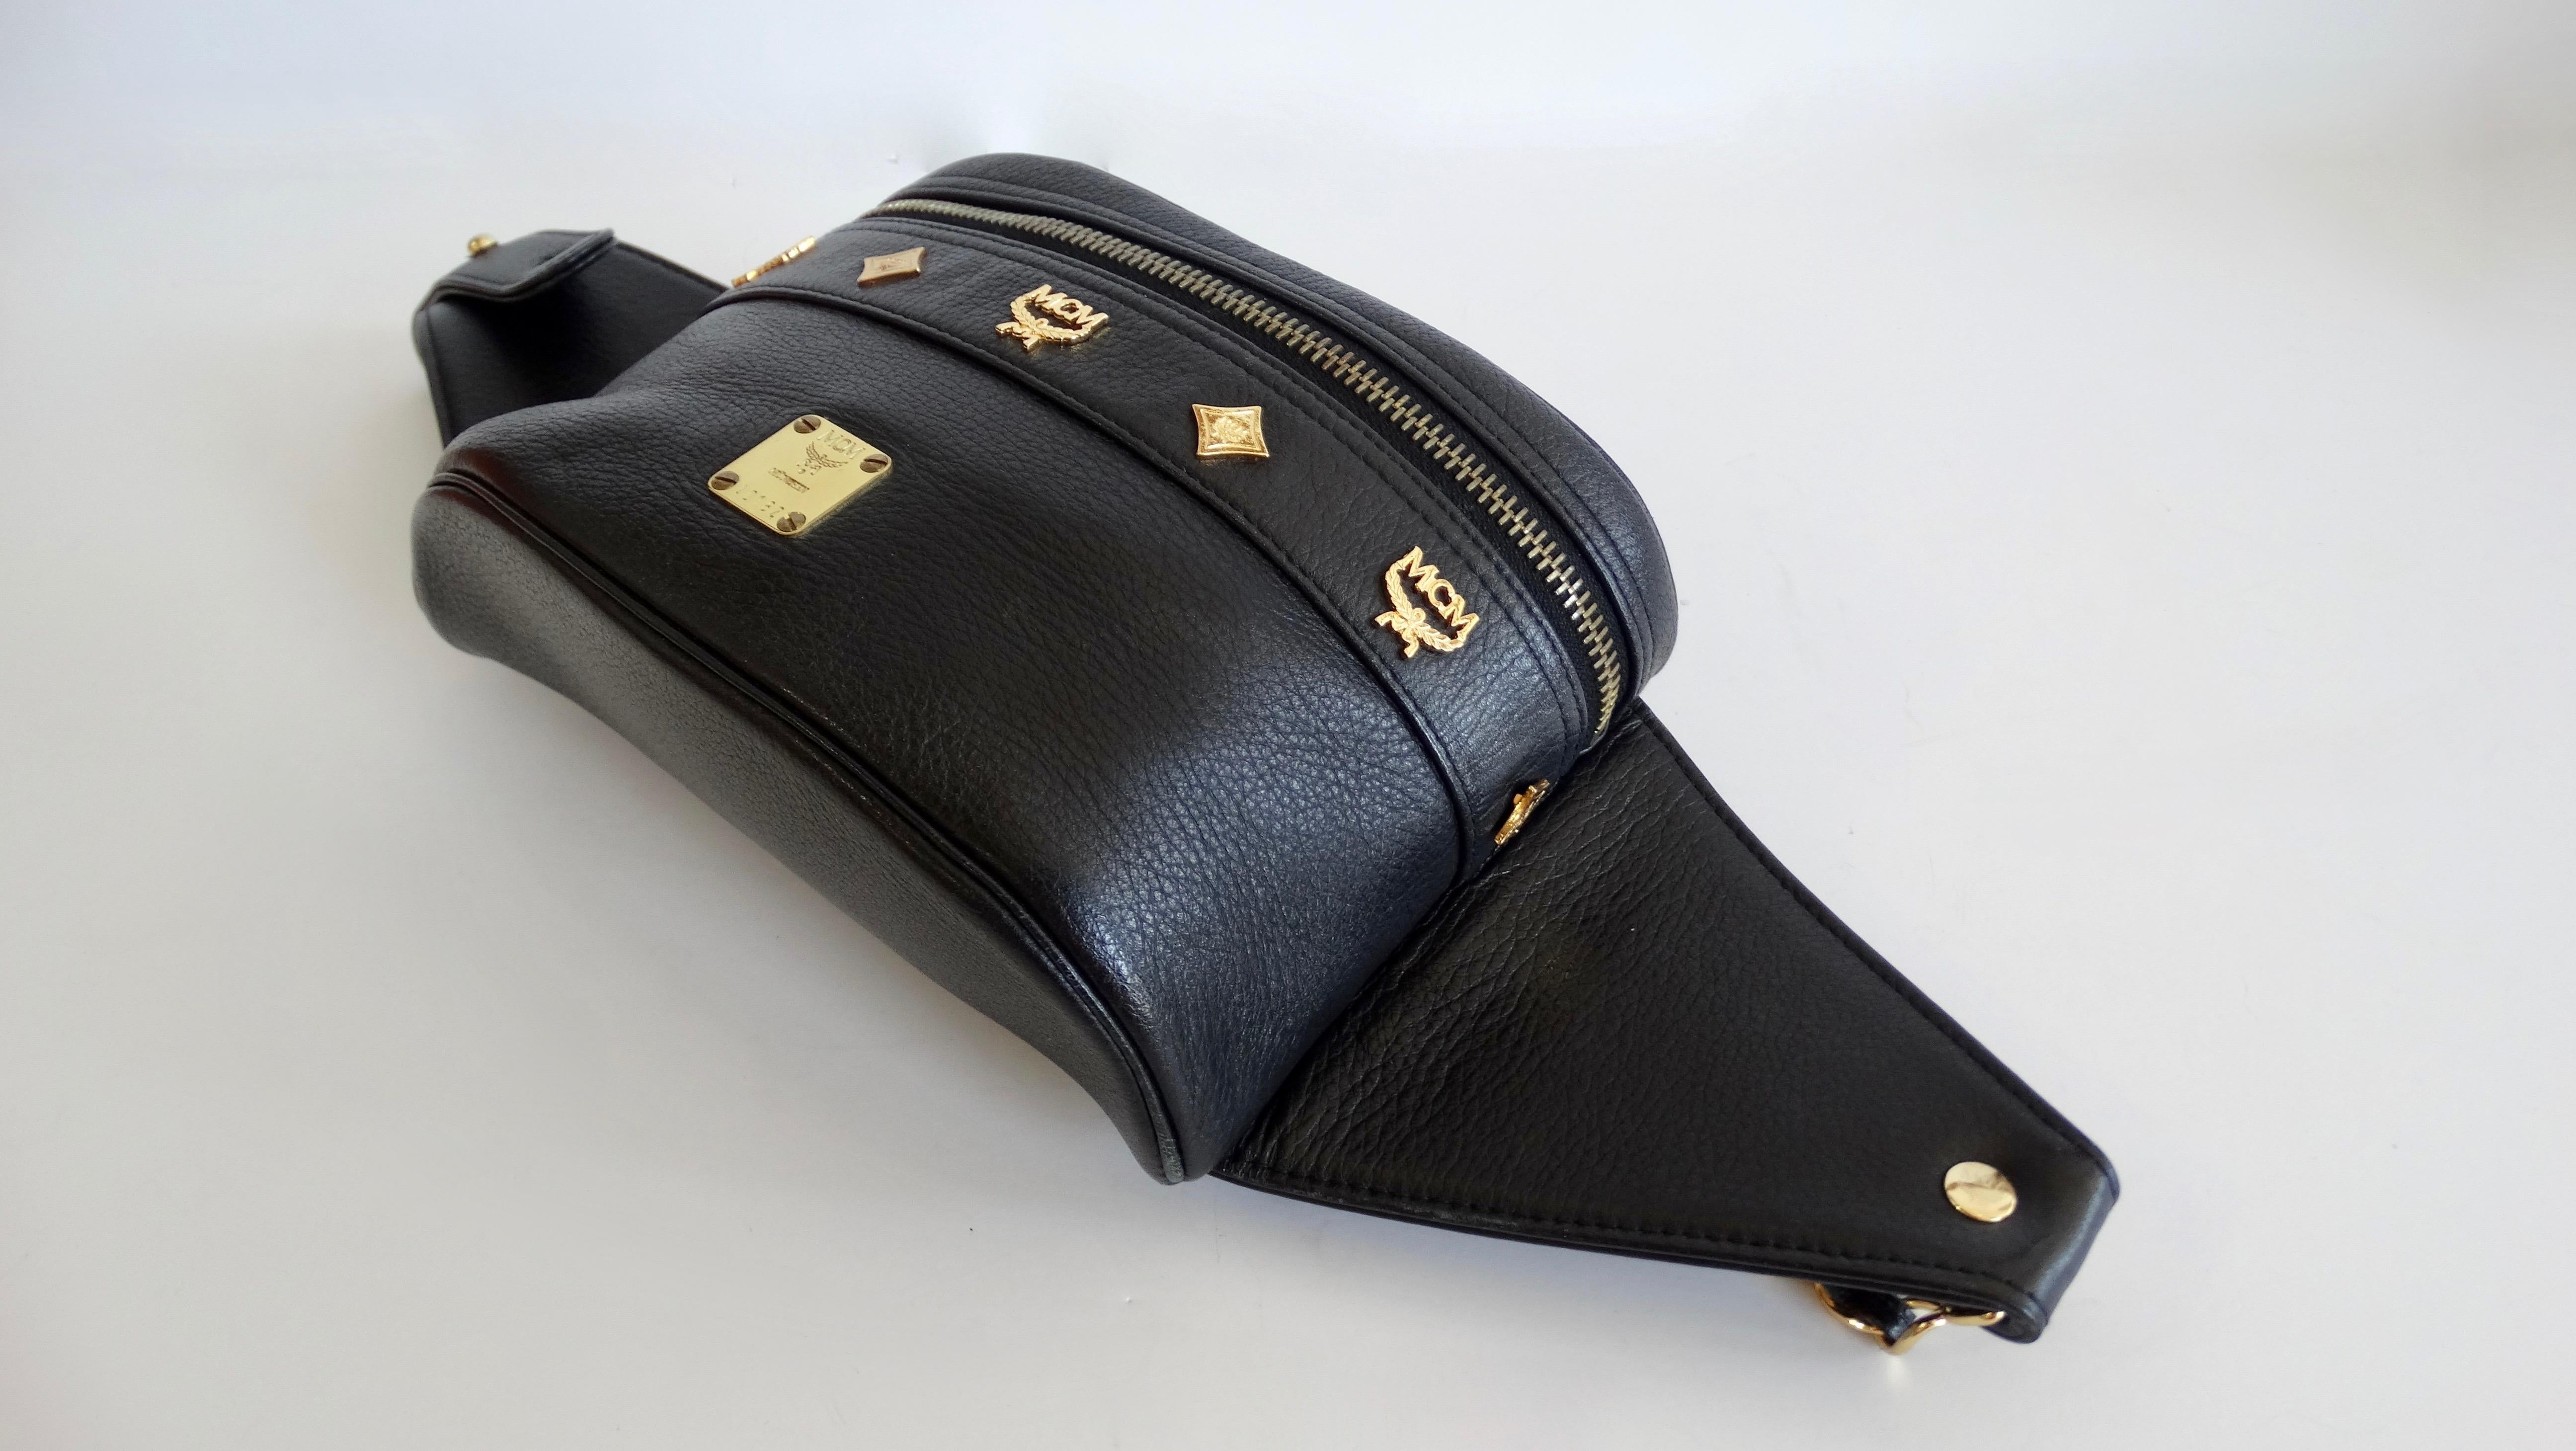 We will never be over a good fanny pack! Circa late 80s/ early 90s, this rare MCM fanny pack designed by Michael Cromer is made of black grained leather and features gold hardware. The front face is decorated with logo embossed studs and a small